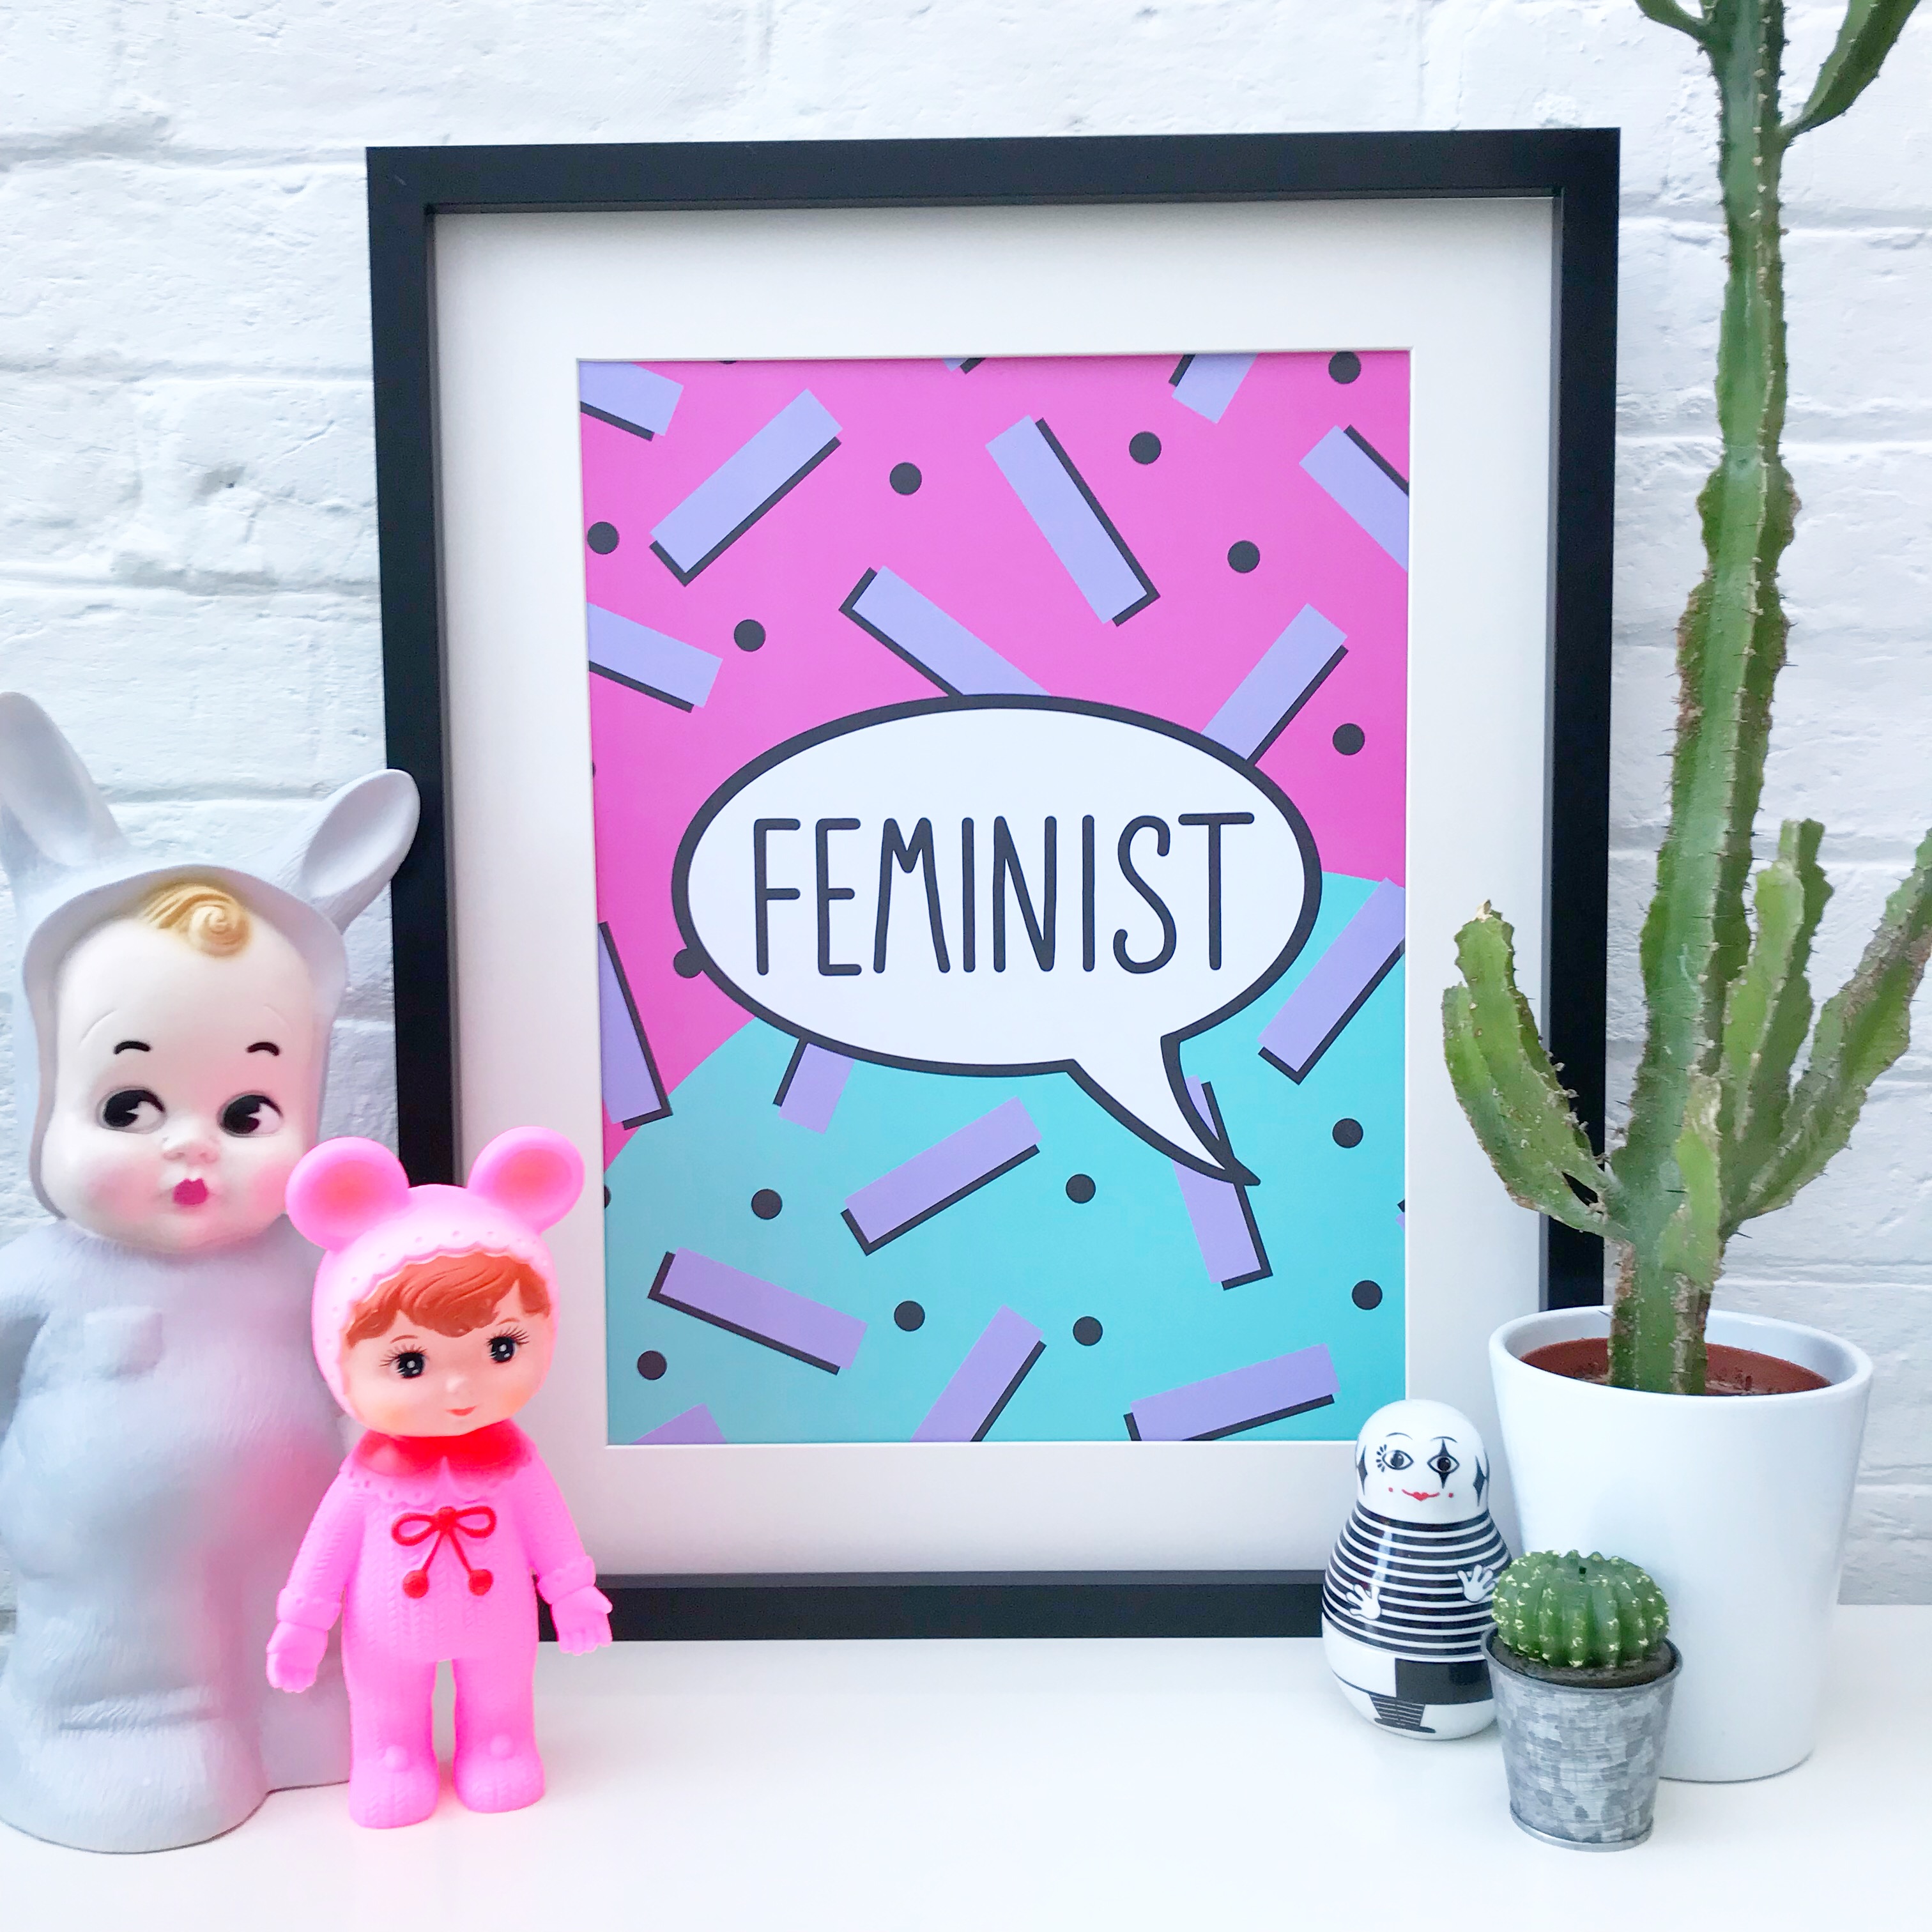 Feminist print by Ted and Kip